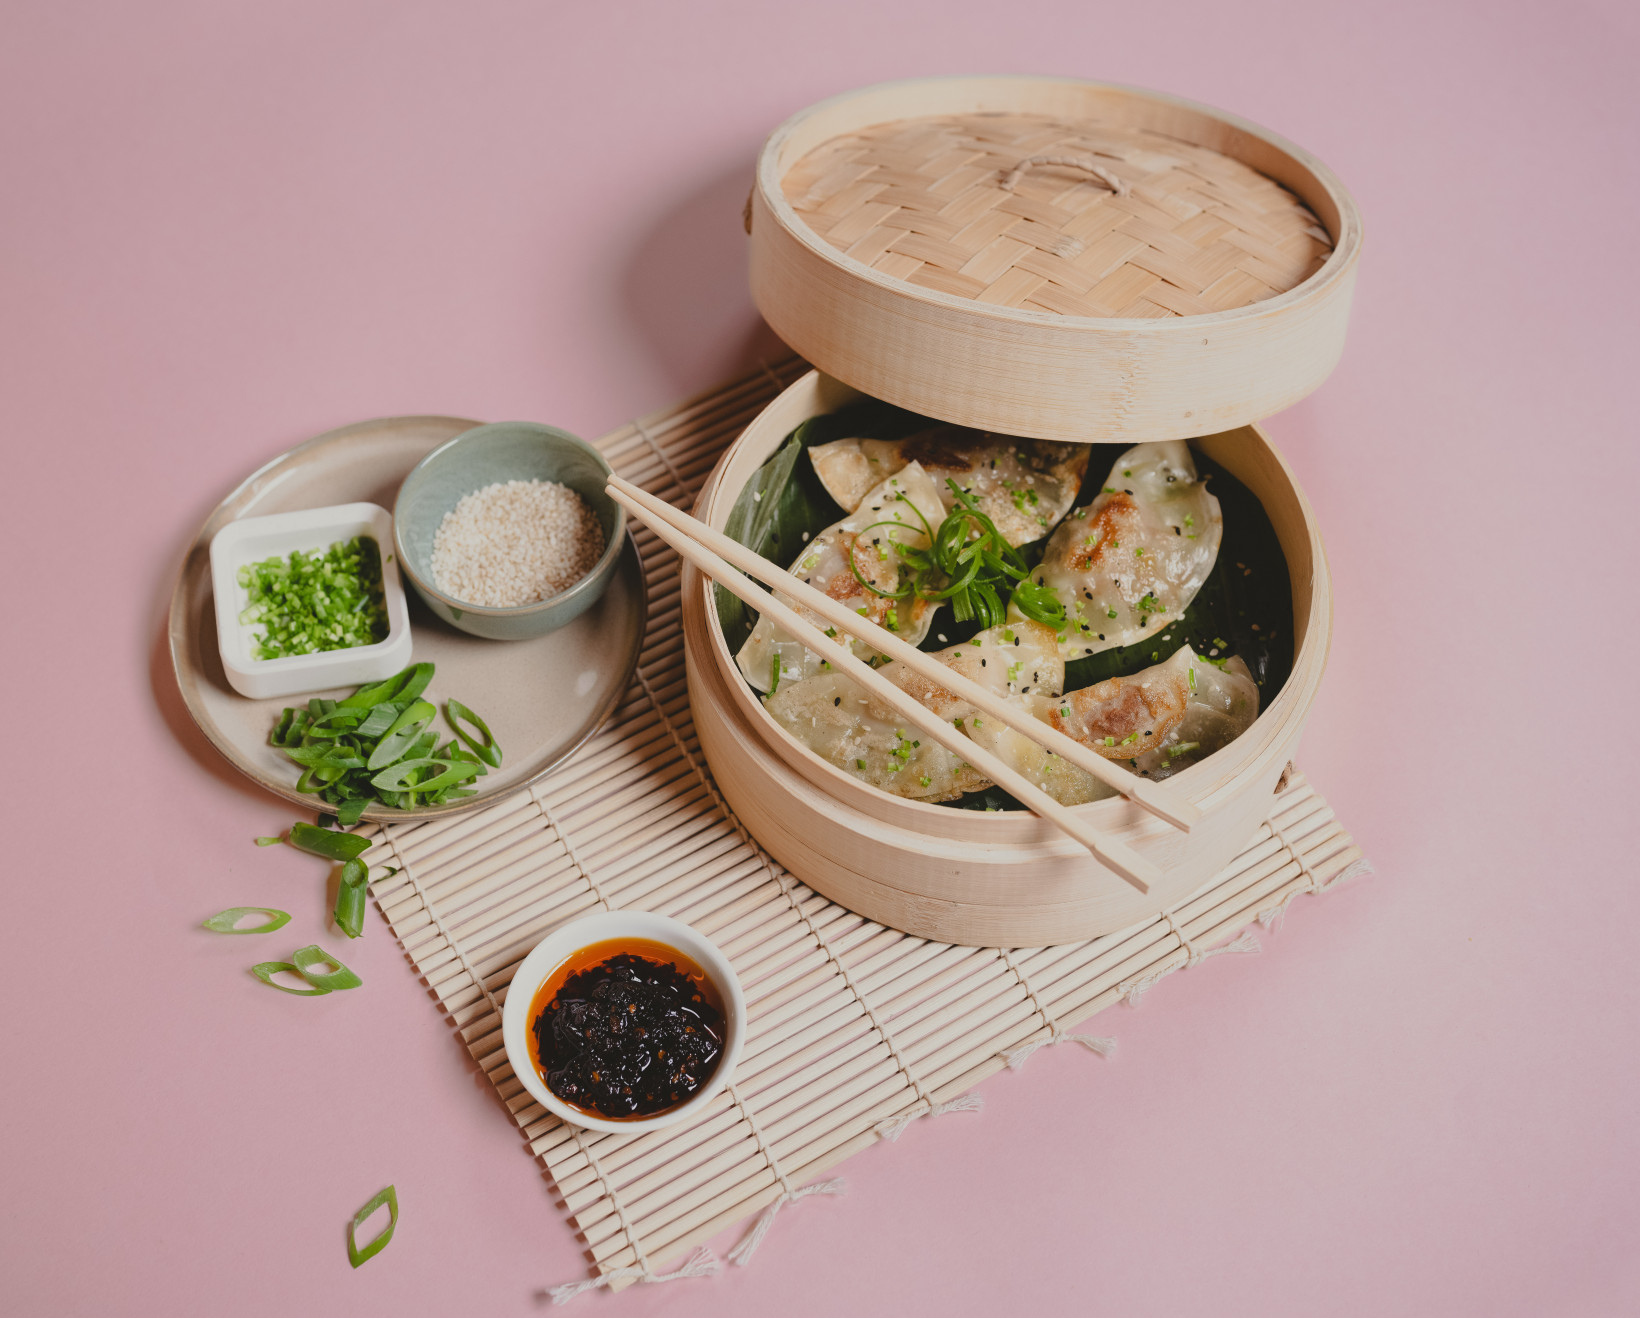 Meatable is working with Singaporean chefs to make dumplings for the Asian market. Credit: Meatable